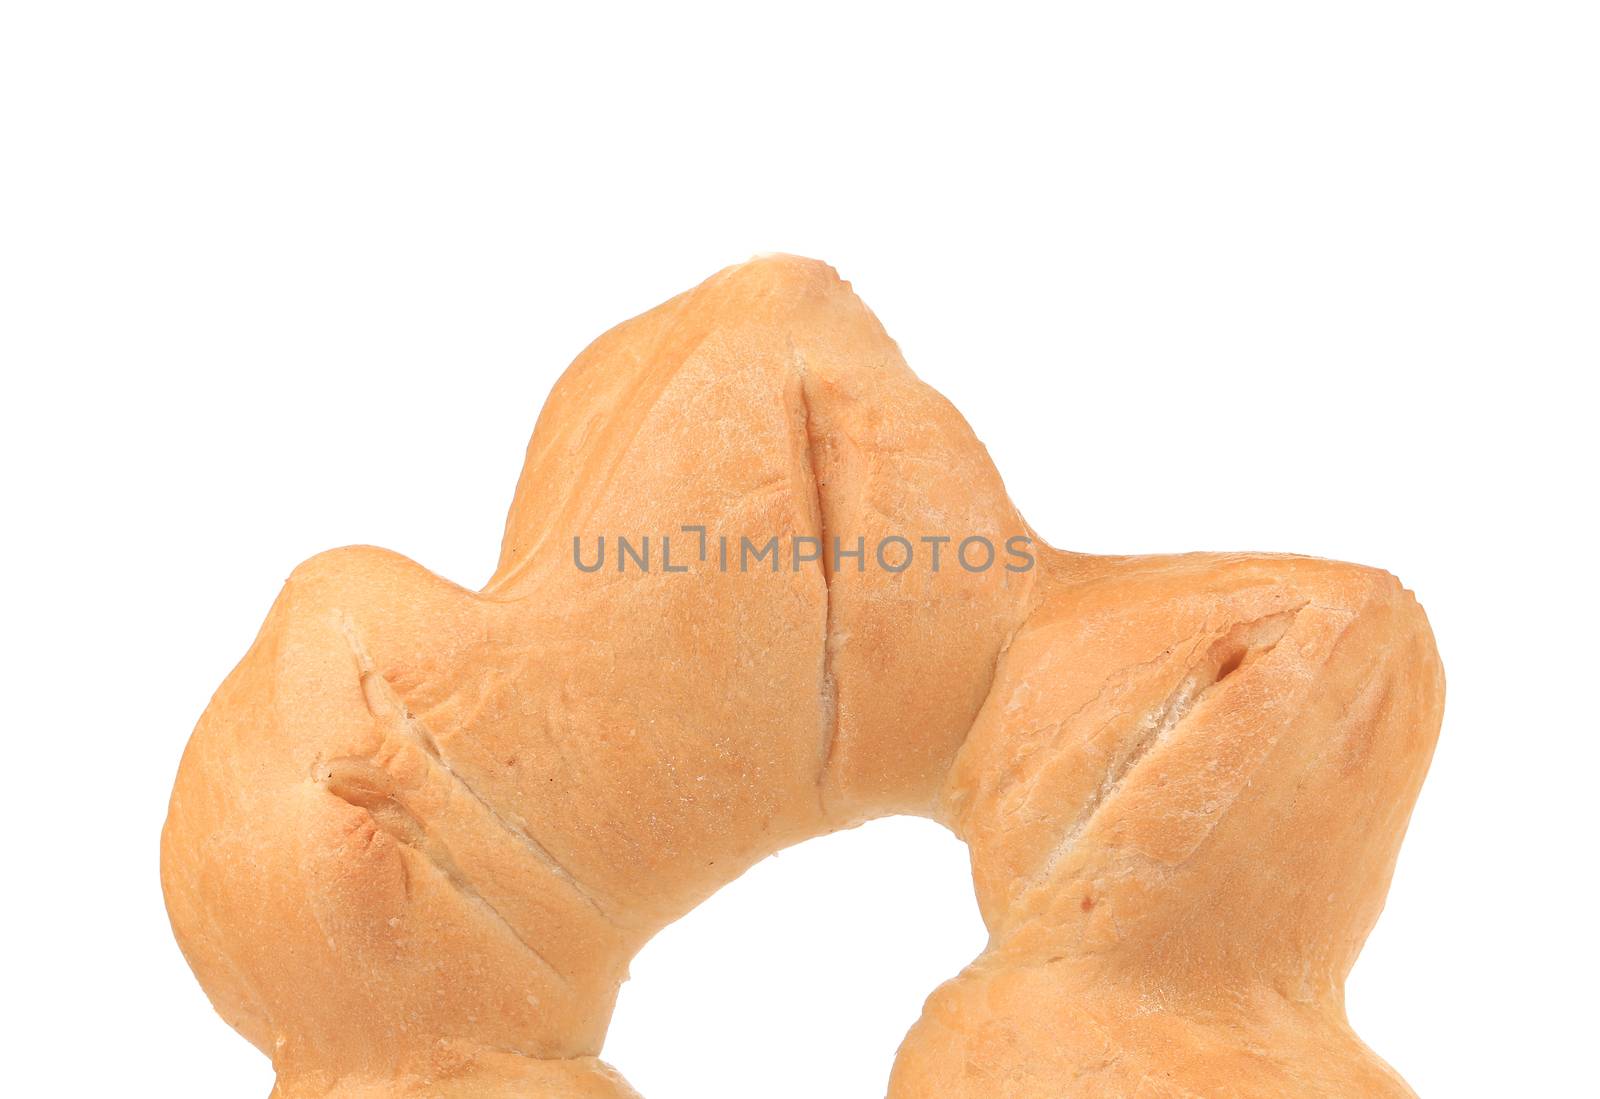 Crispy fresh bread close-up. Isolated on a white background.